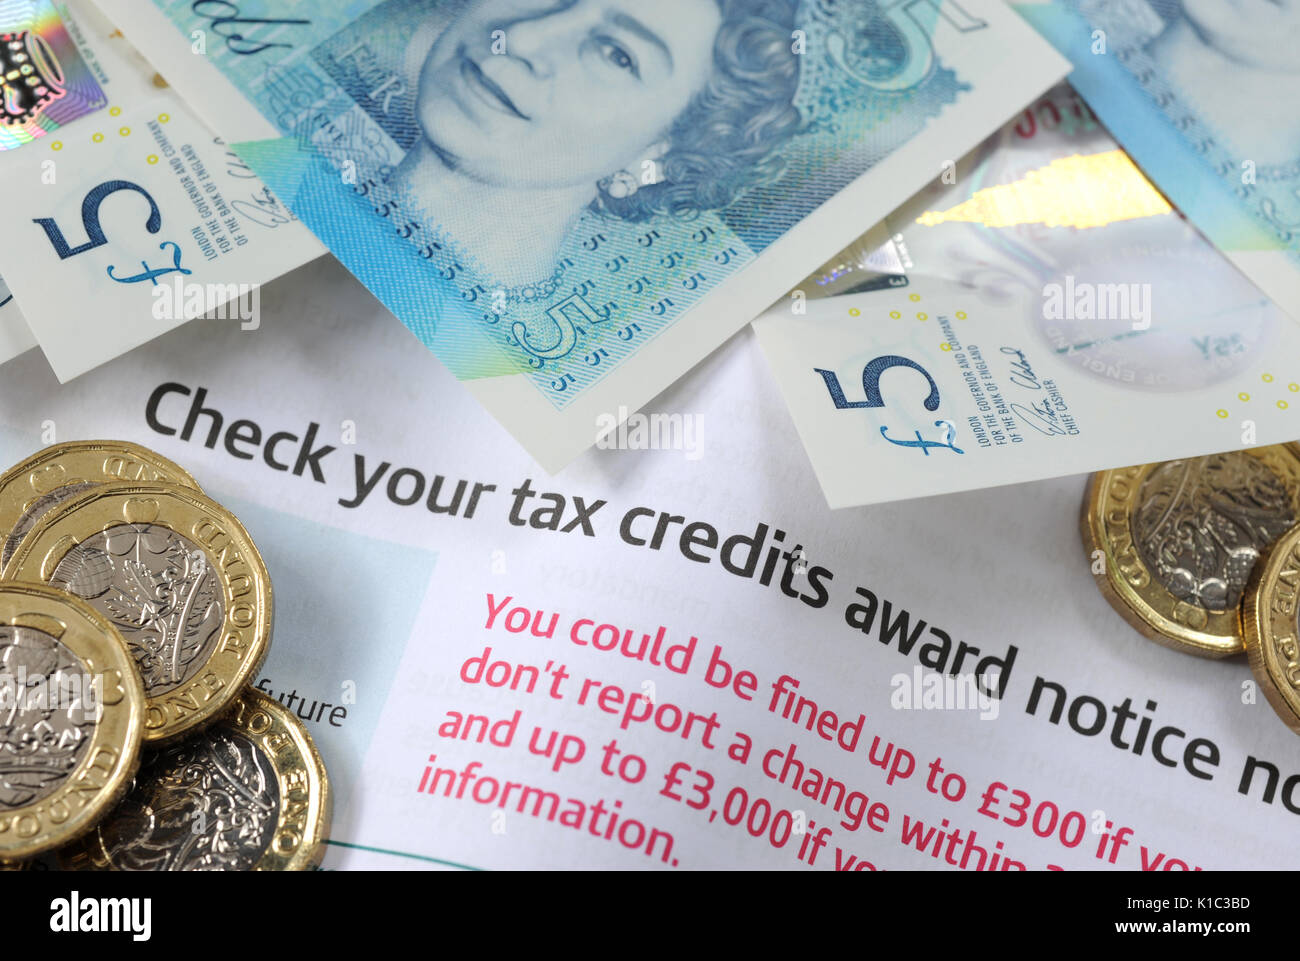 GOVERNMENT WORKING TAX CREDITS AWARD NOTICE LETTER WITH BRITISH MONEY UK Stock Photo